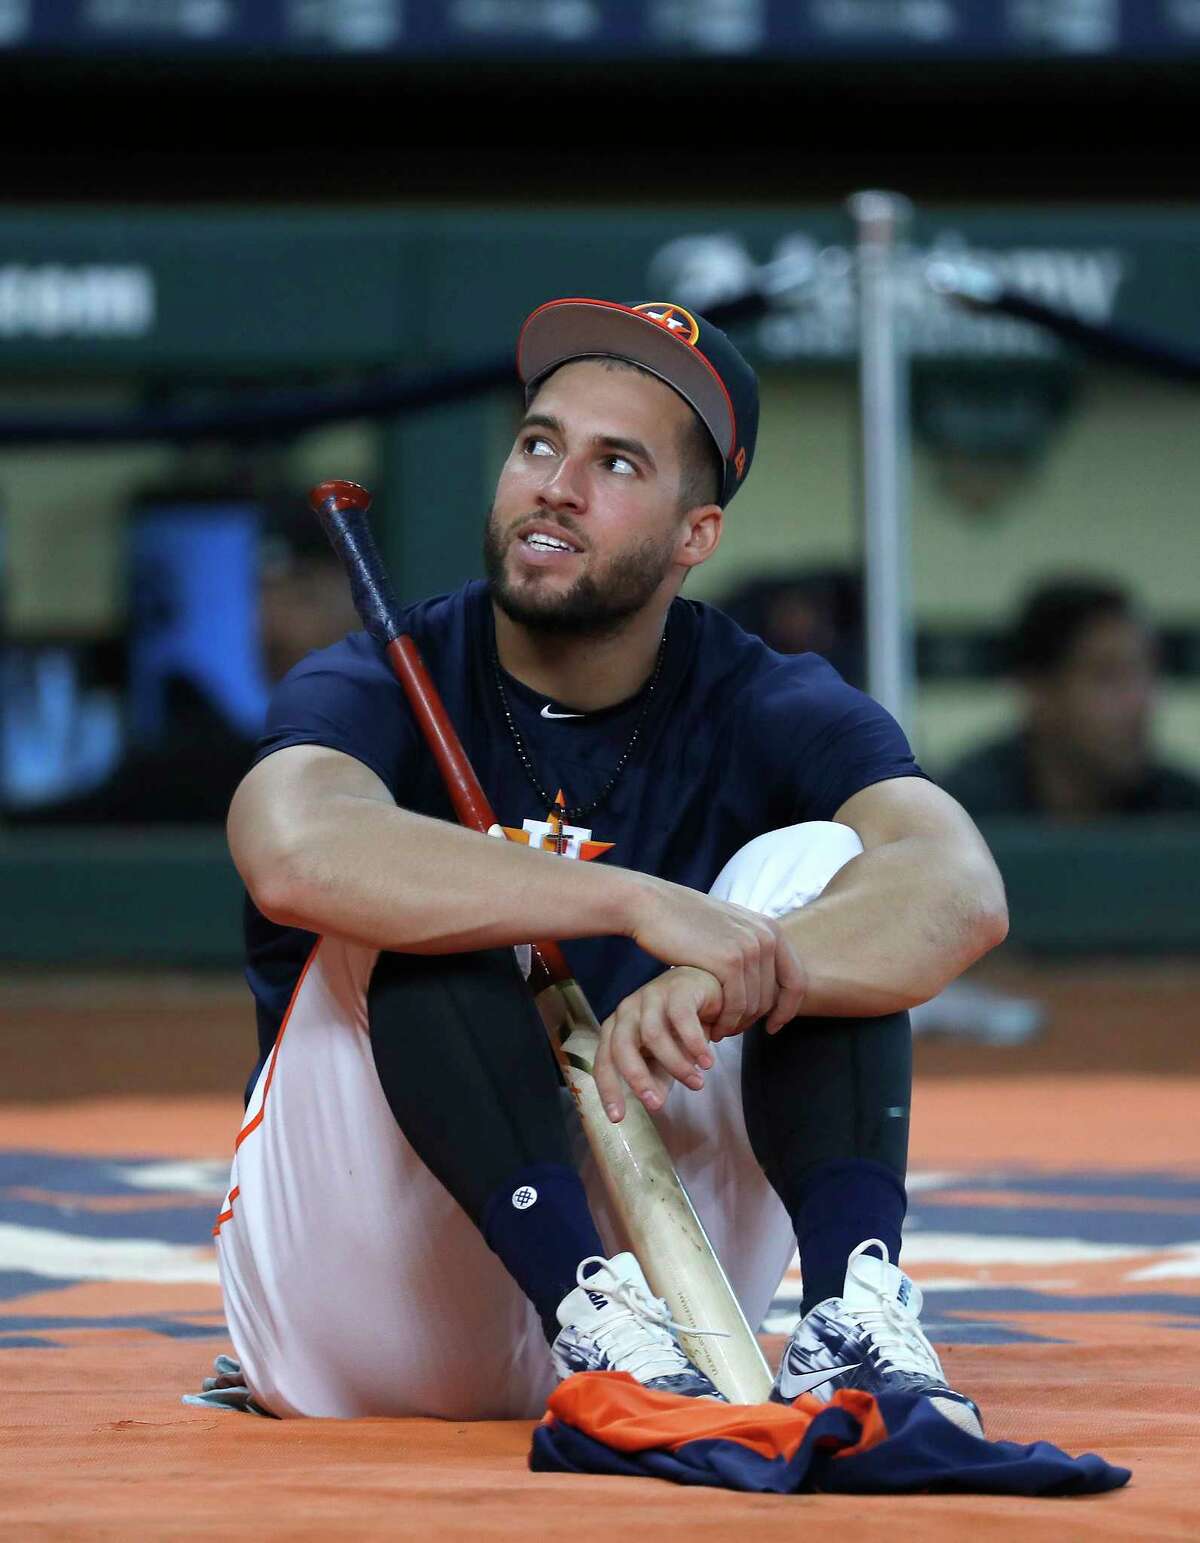 Houston Astros George Springer during batting practice before the start of an MLB game at Minute Maid Park, Tuesday, August 14, 2018, in Houston.